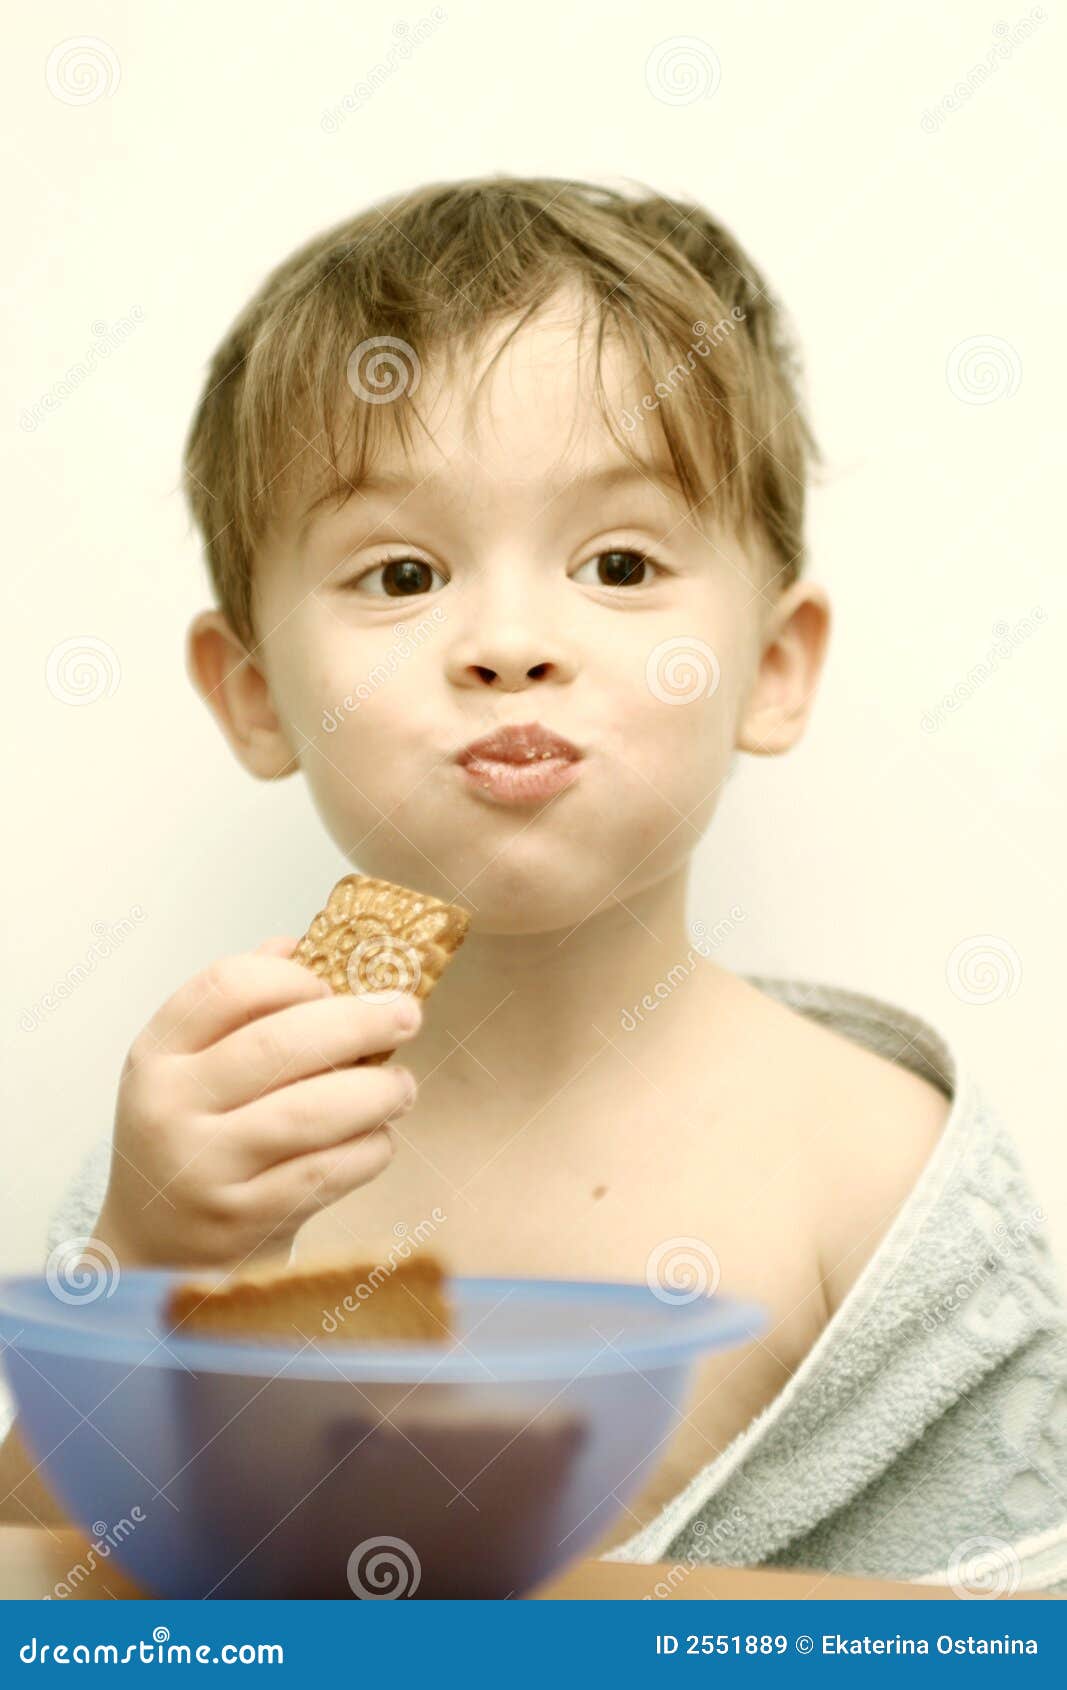 the child eats cookies